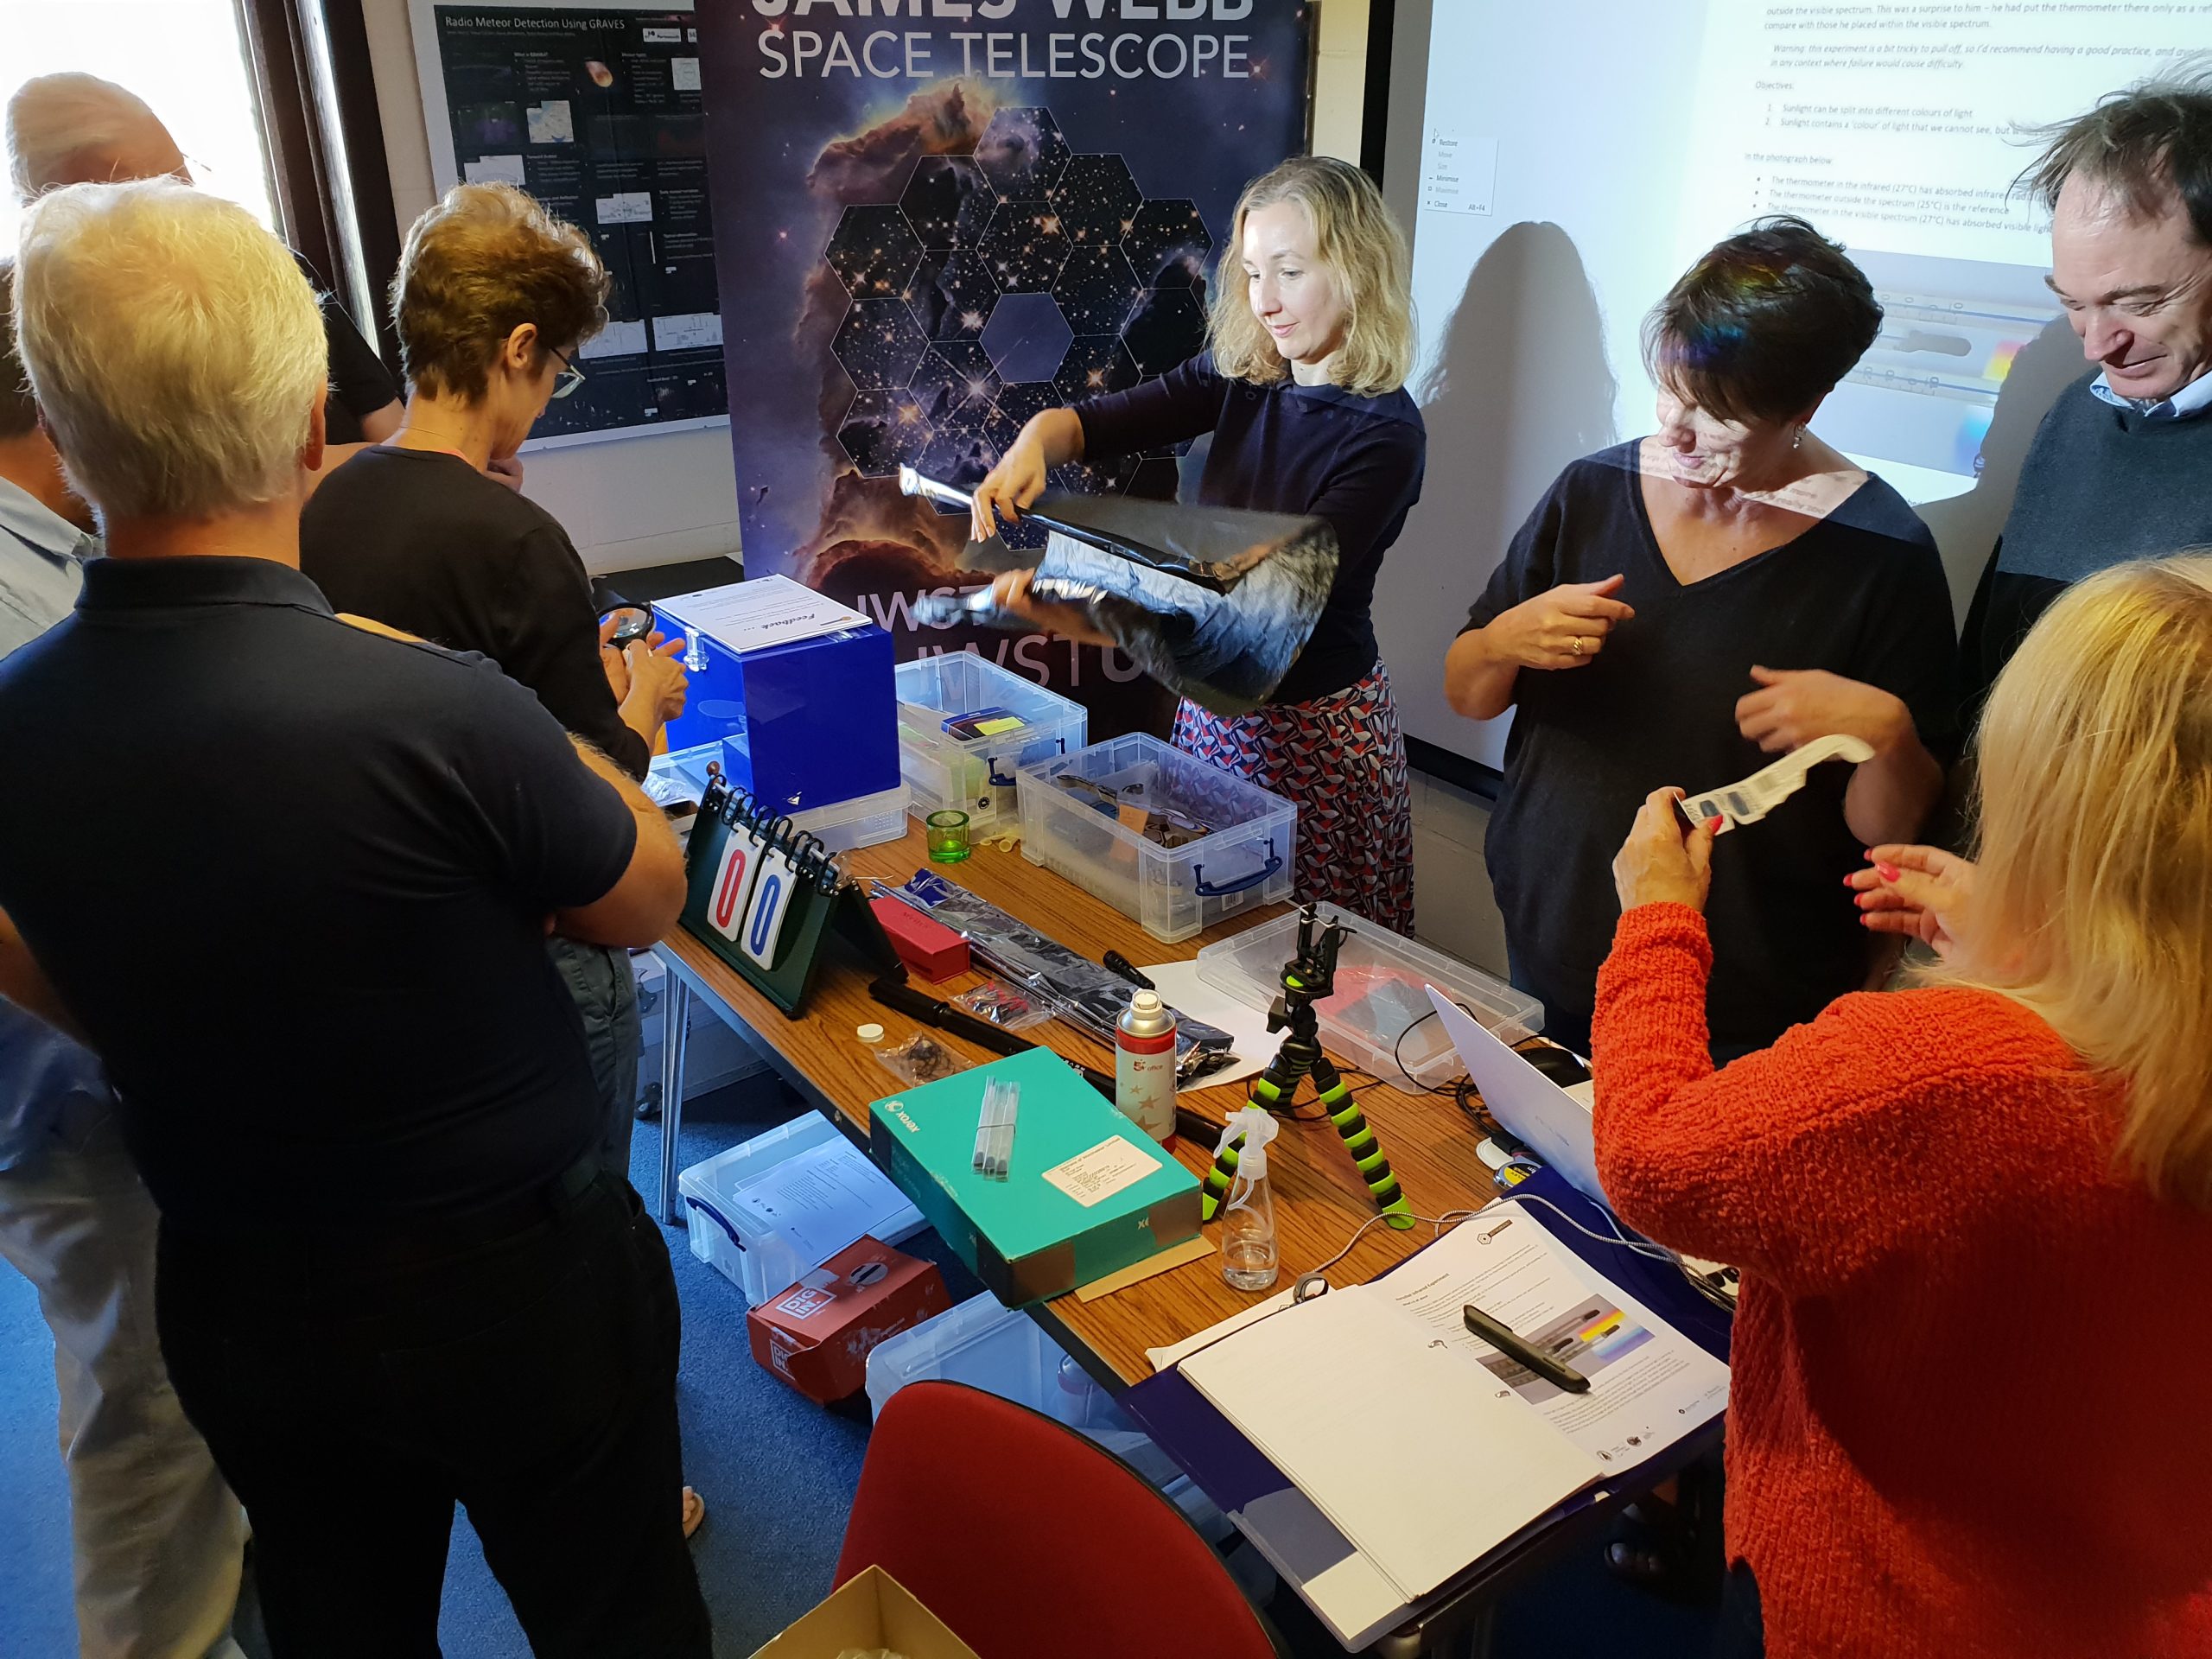 People gathered around a table of astronomy activities